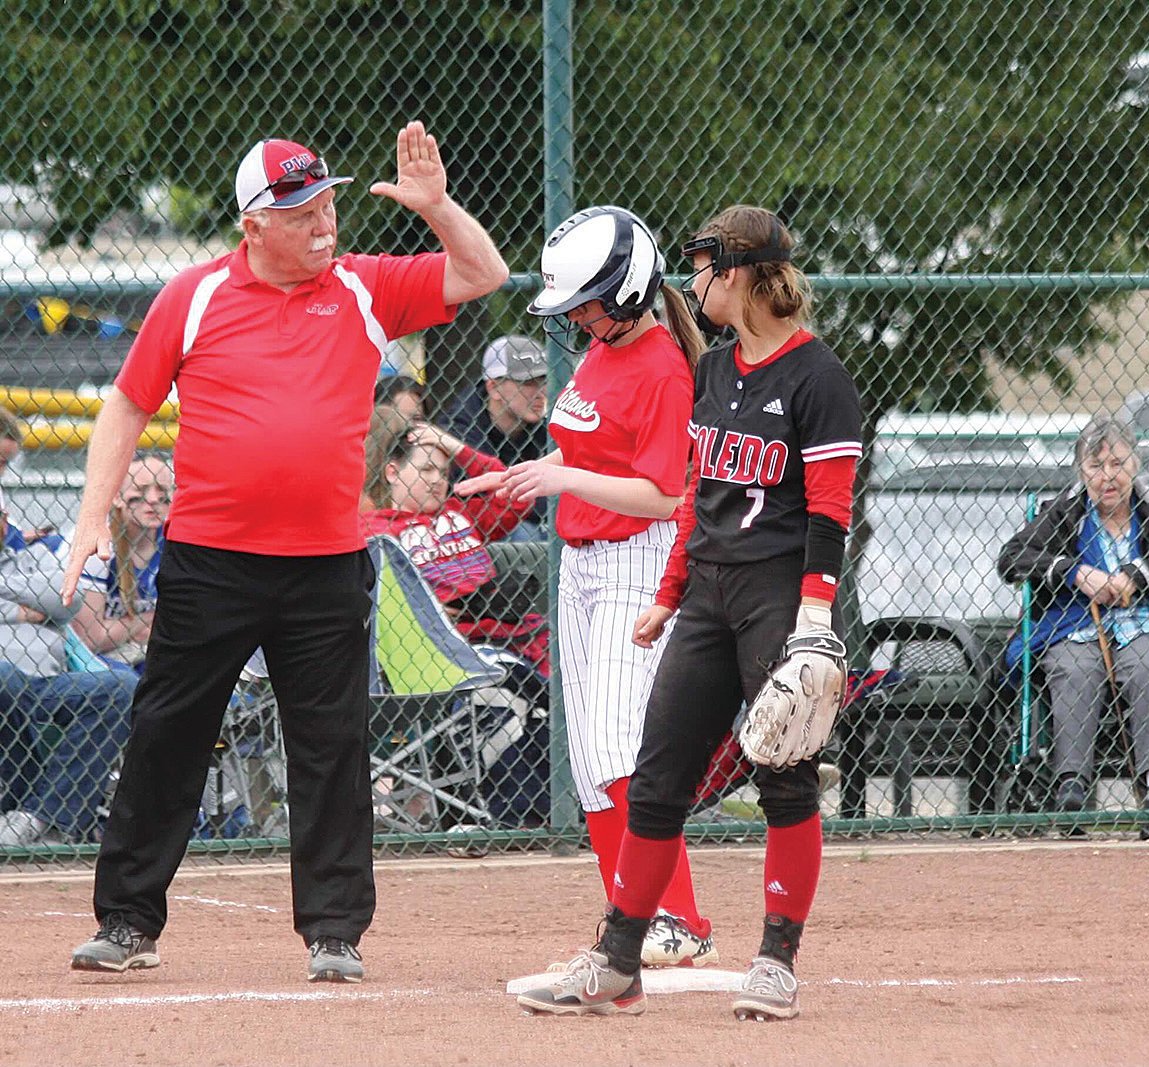 PWV coach Ken Olson congratulates a player on Friday during a win over Toledo in the 2B state softball tournament in Yakima.